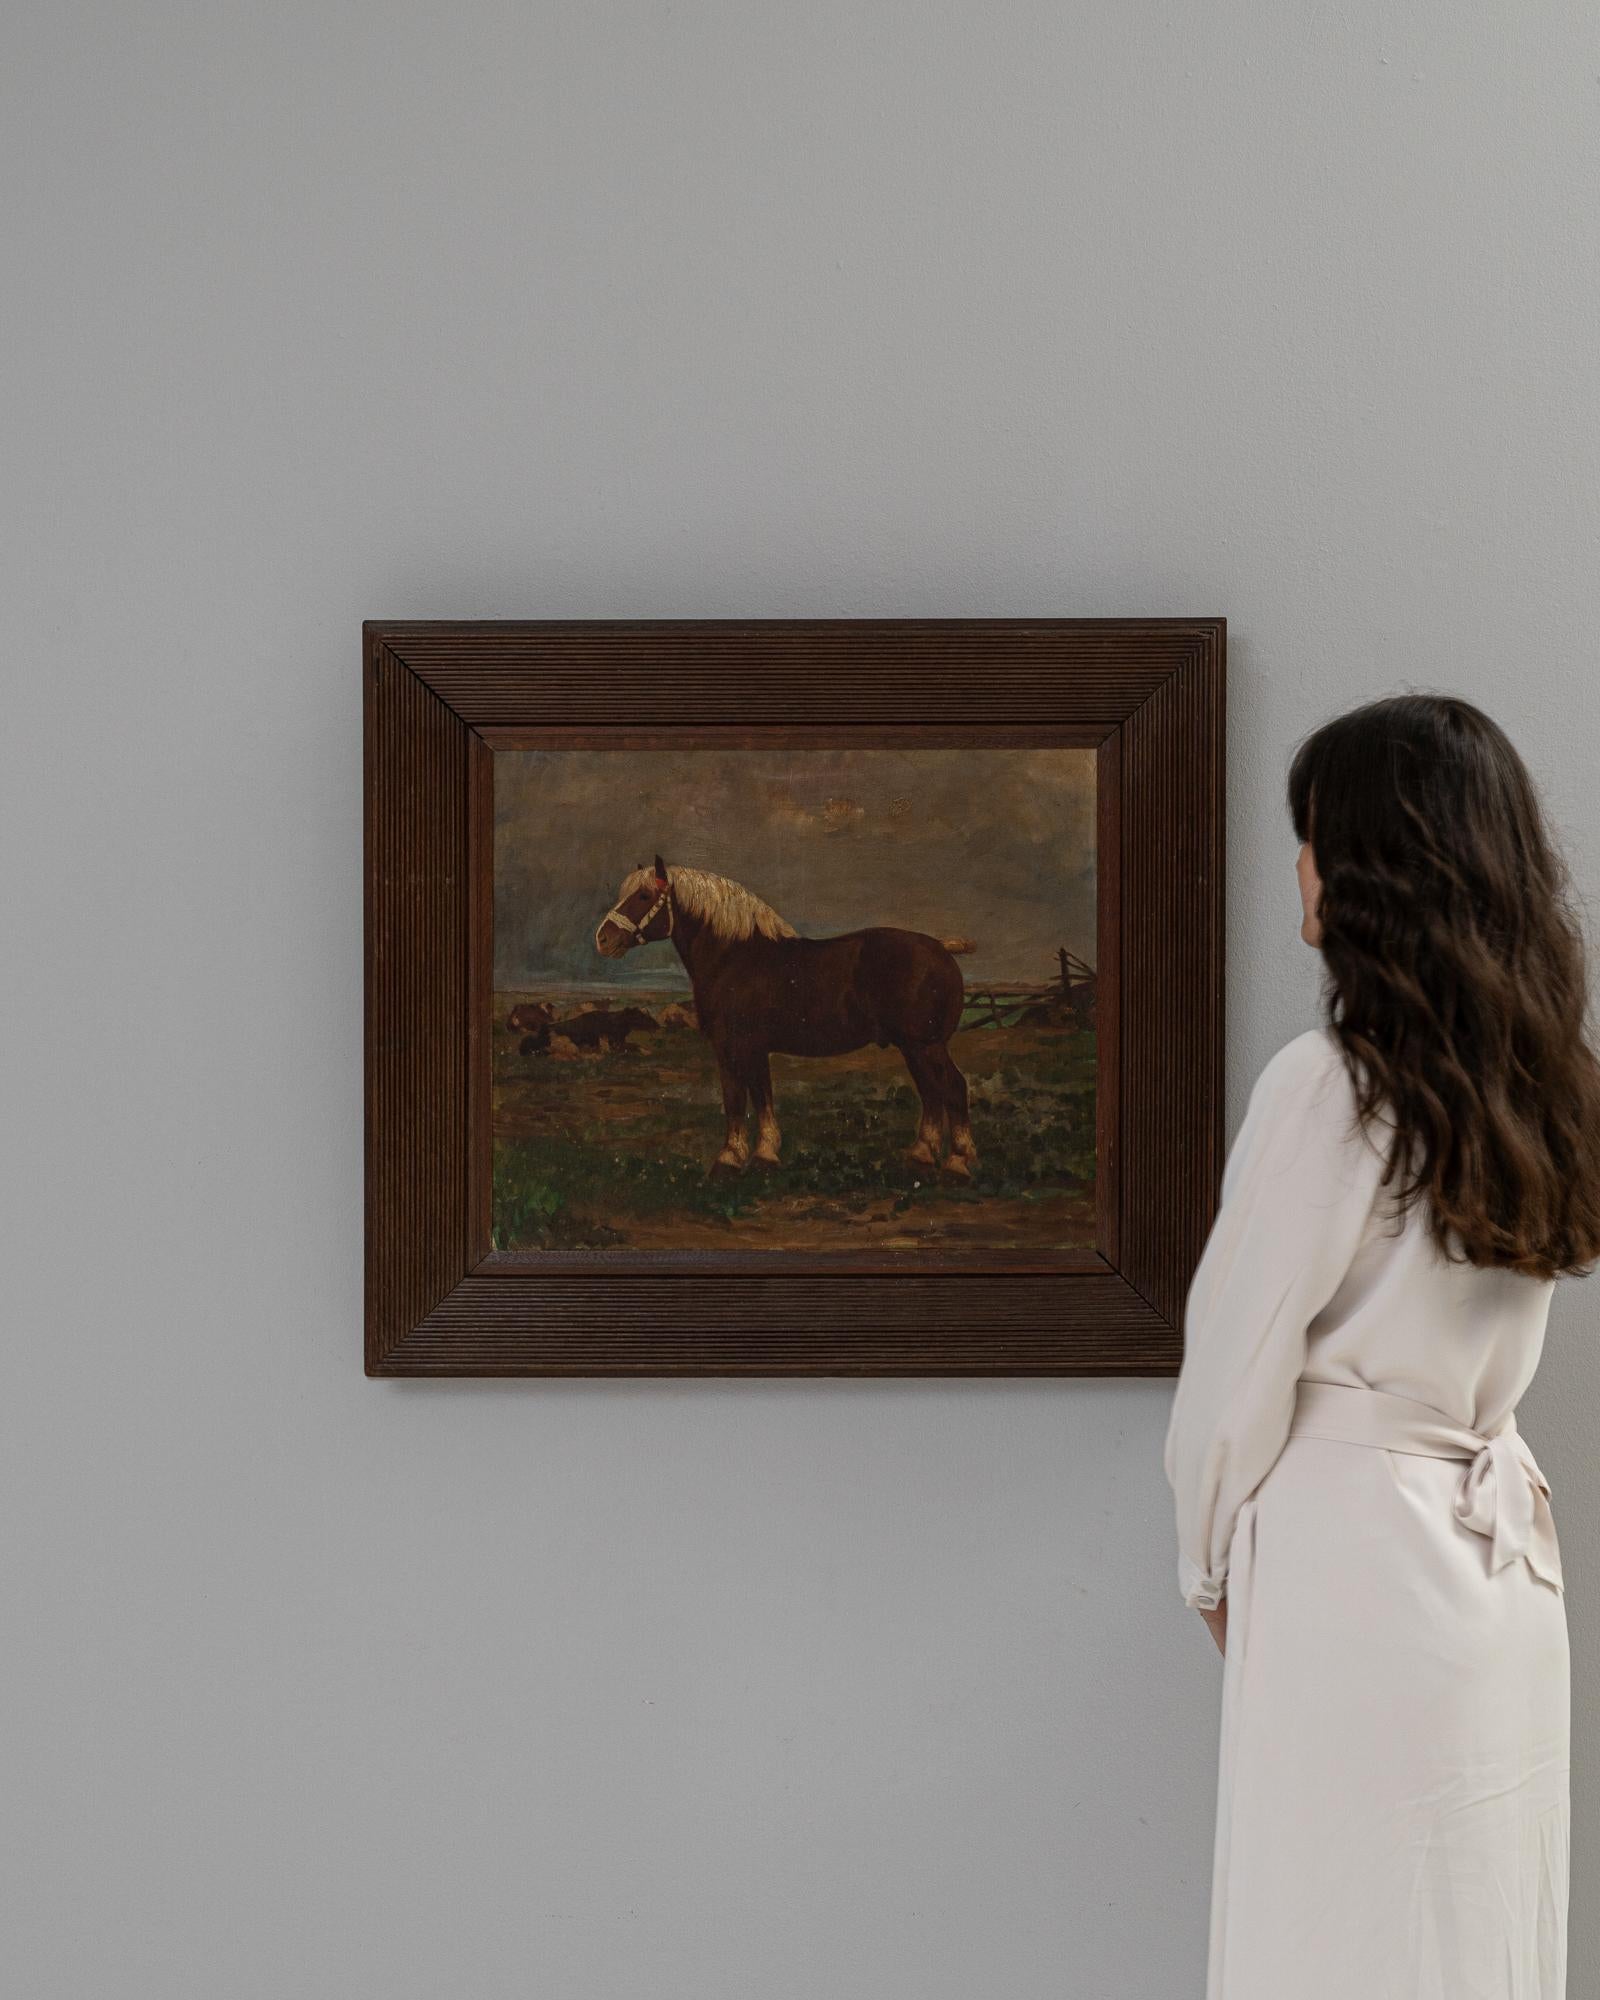 This 20th-century Belgian painting presents a majestic horse in its pastoral splendor, a piece that exudes the quiet strength and beauty of the animal. The horse, poised with confidence, stands at the center of a rural landscape that evokes the